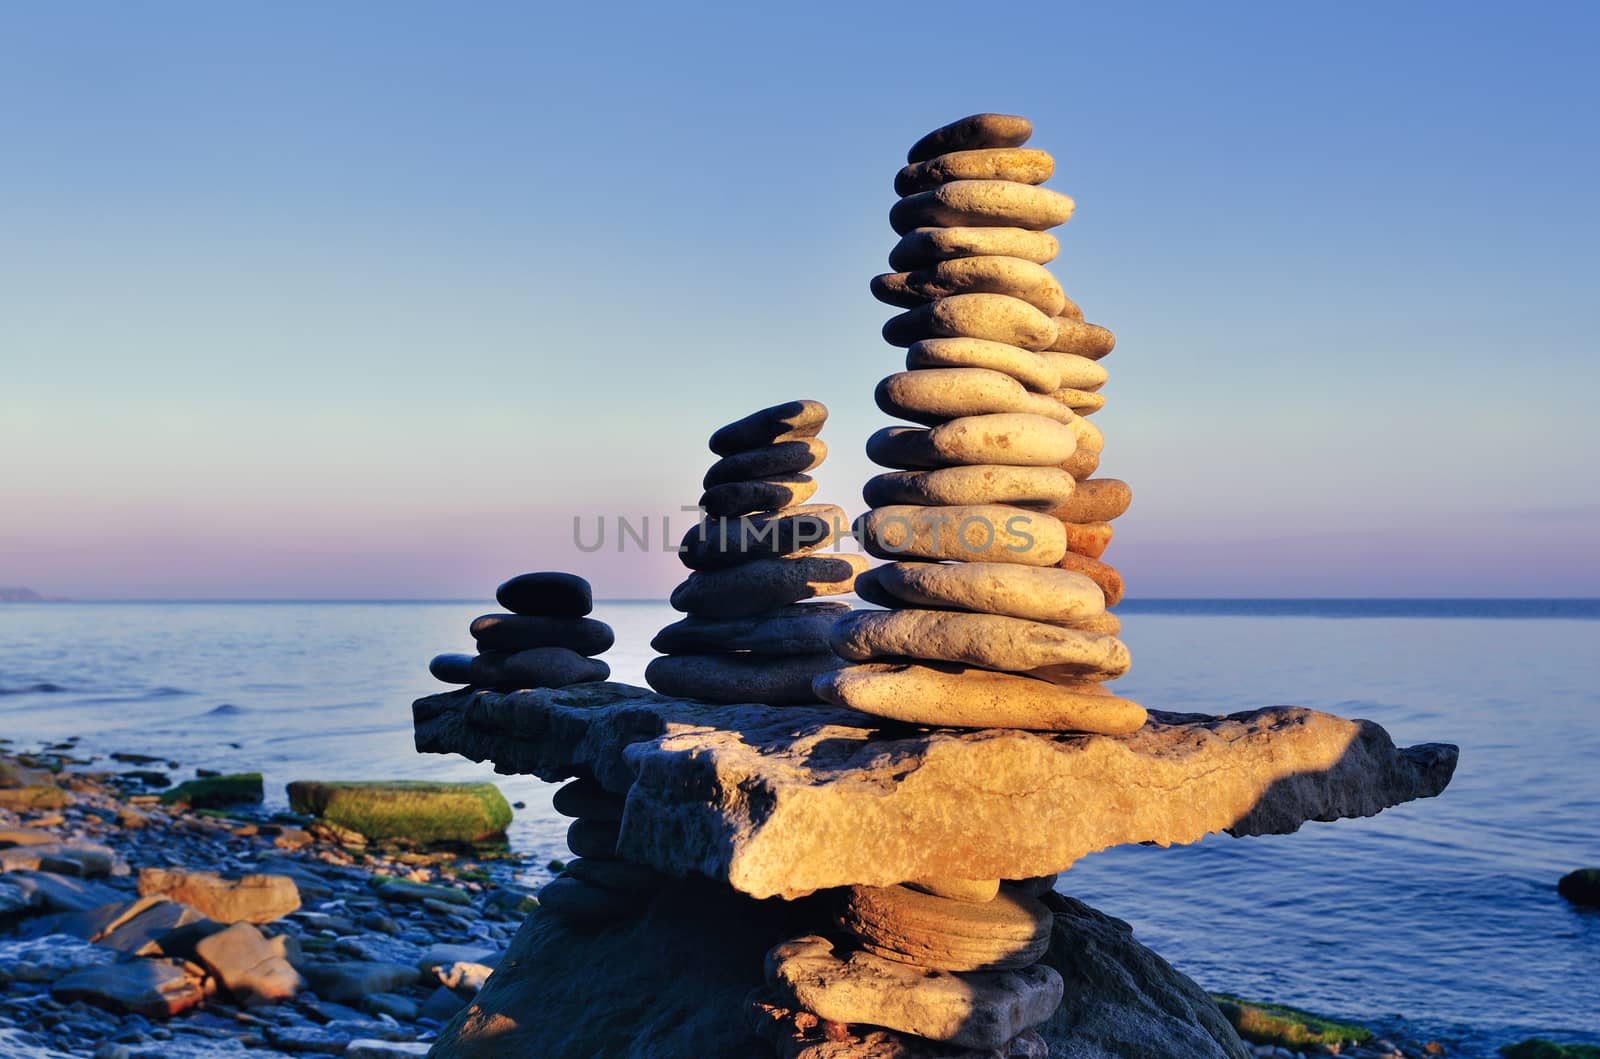 Balancing of stones each other on the coast